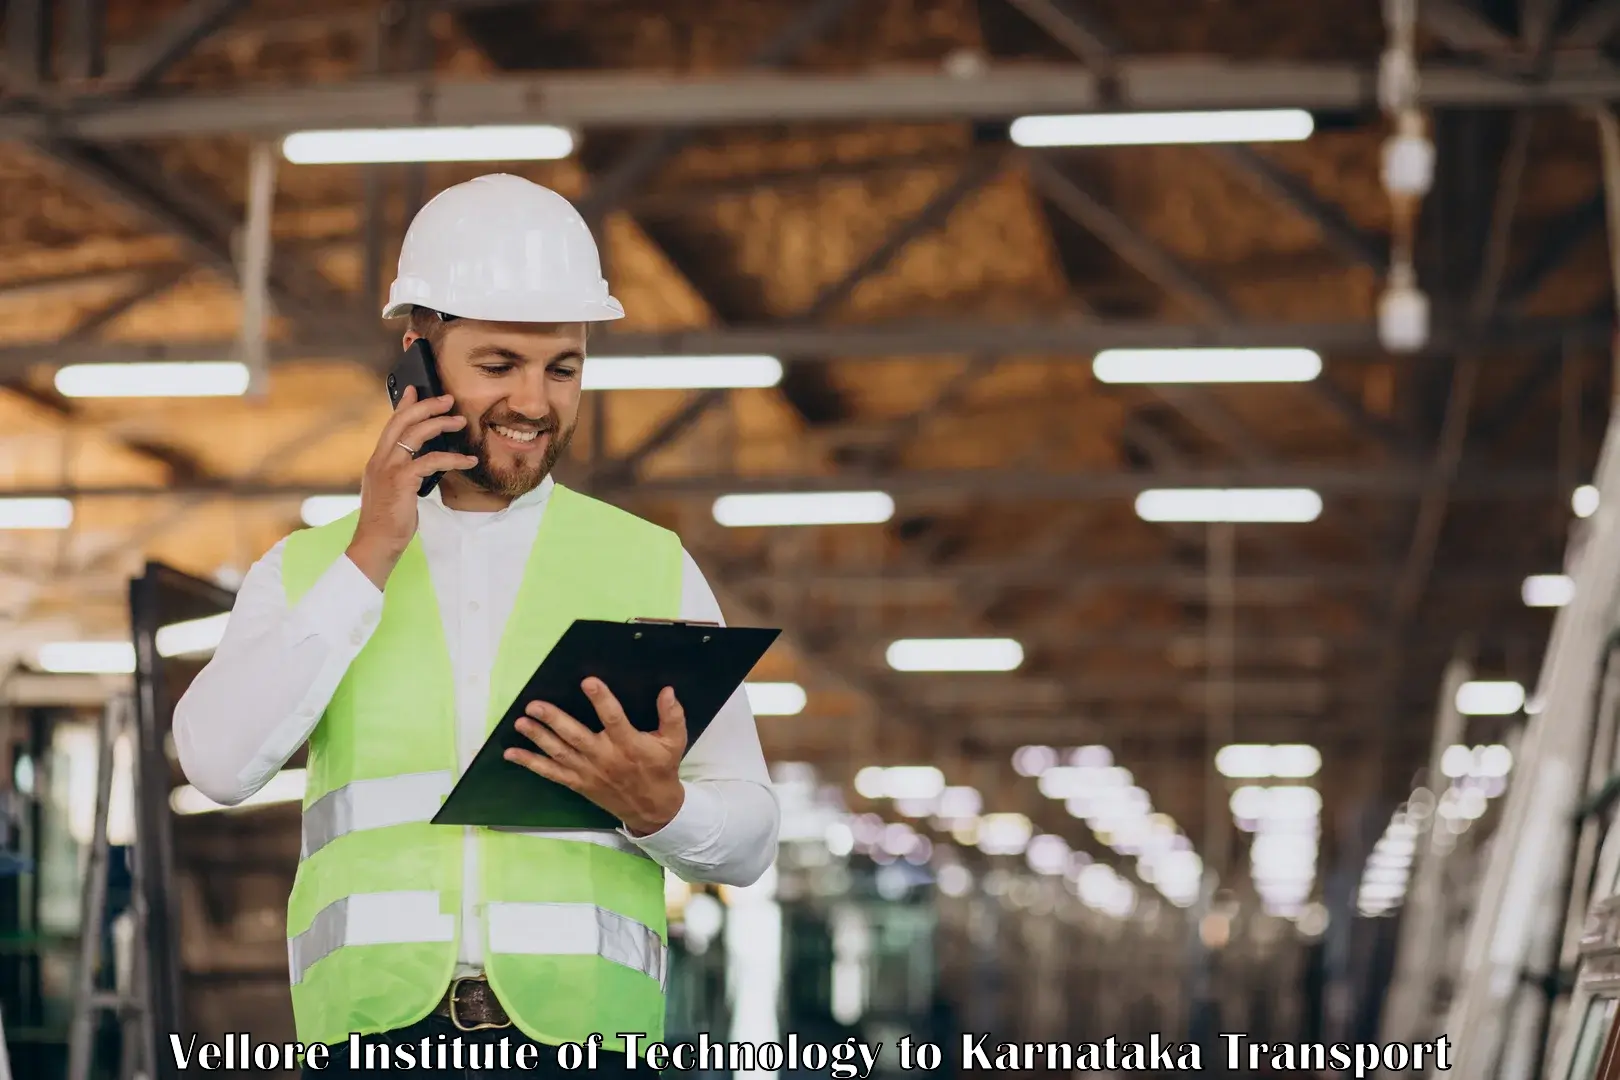 Material transport services Vellore Institute of Technology to Karkala